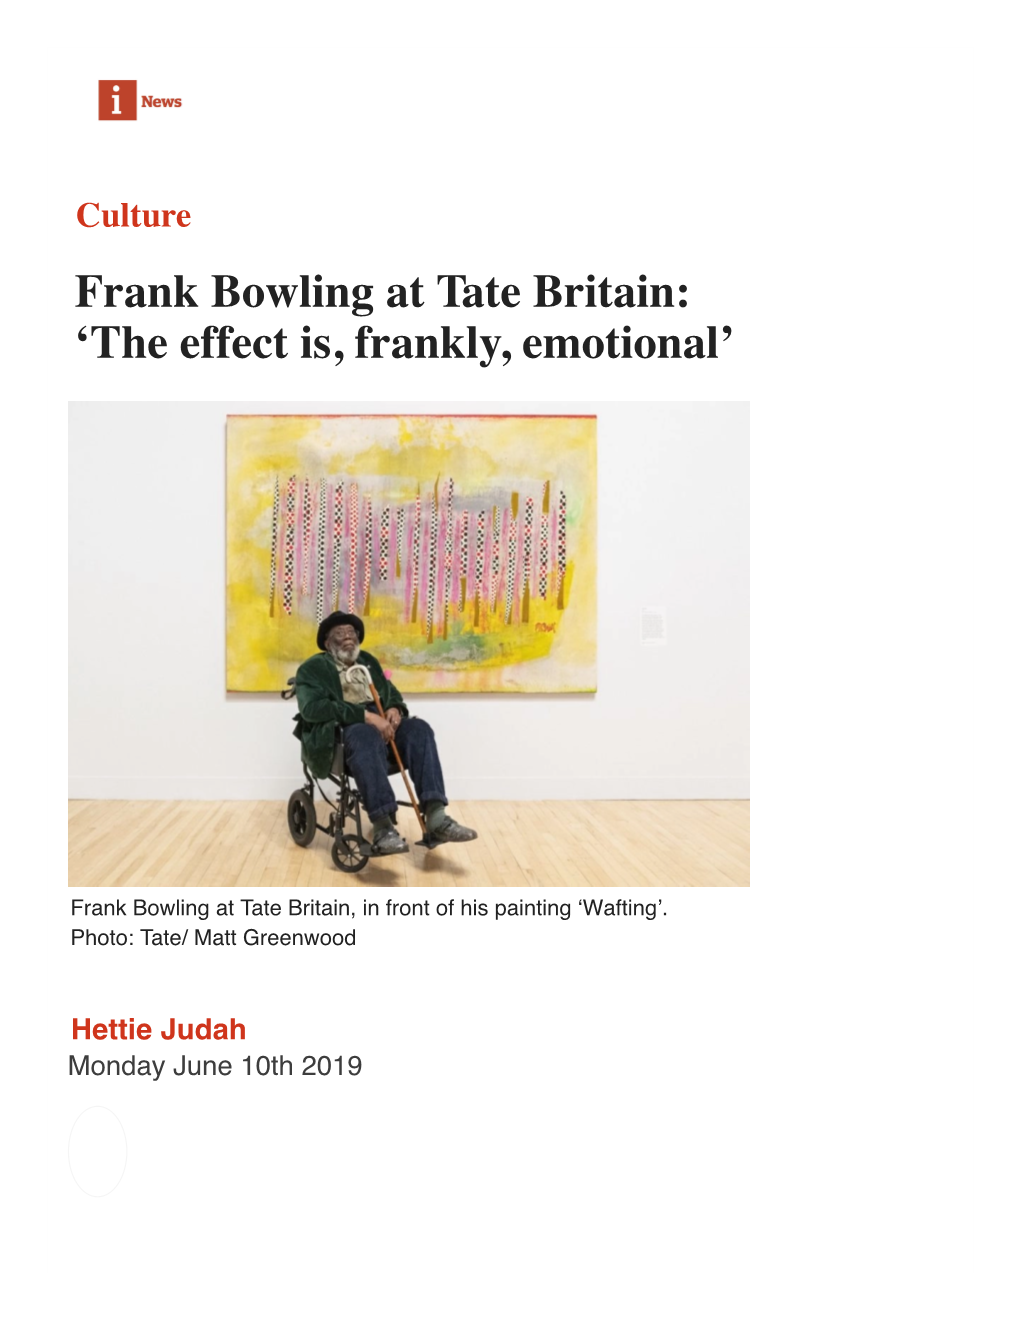 Frank Bowling at Tate Britain: 'The Effect Is, Frankly, Emotional'